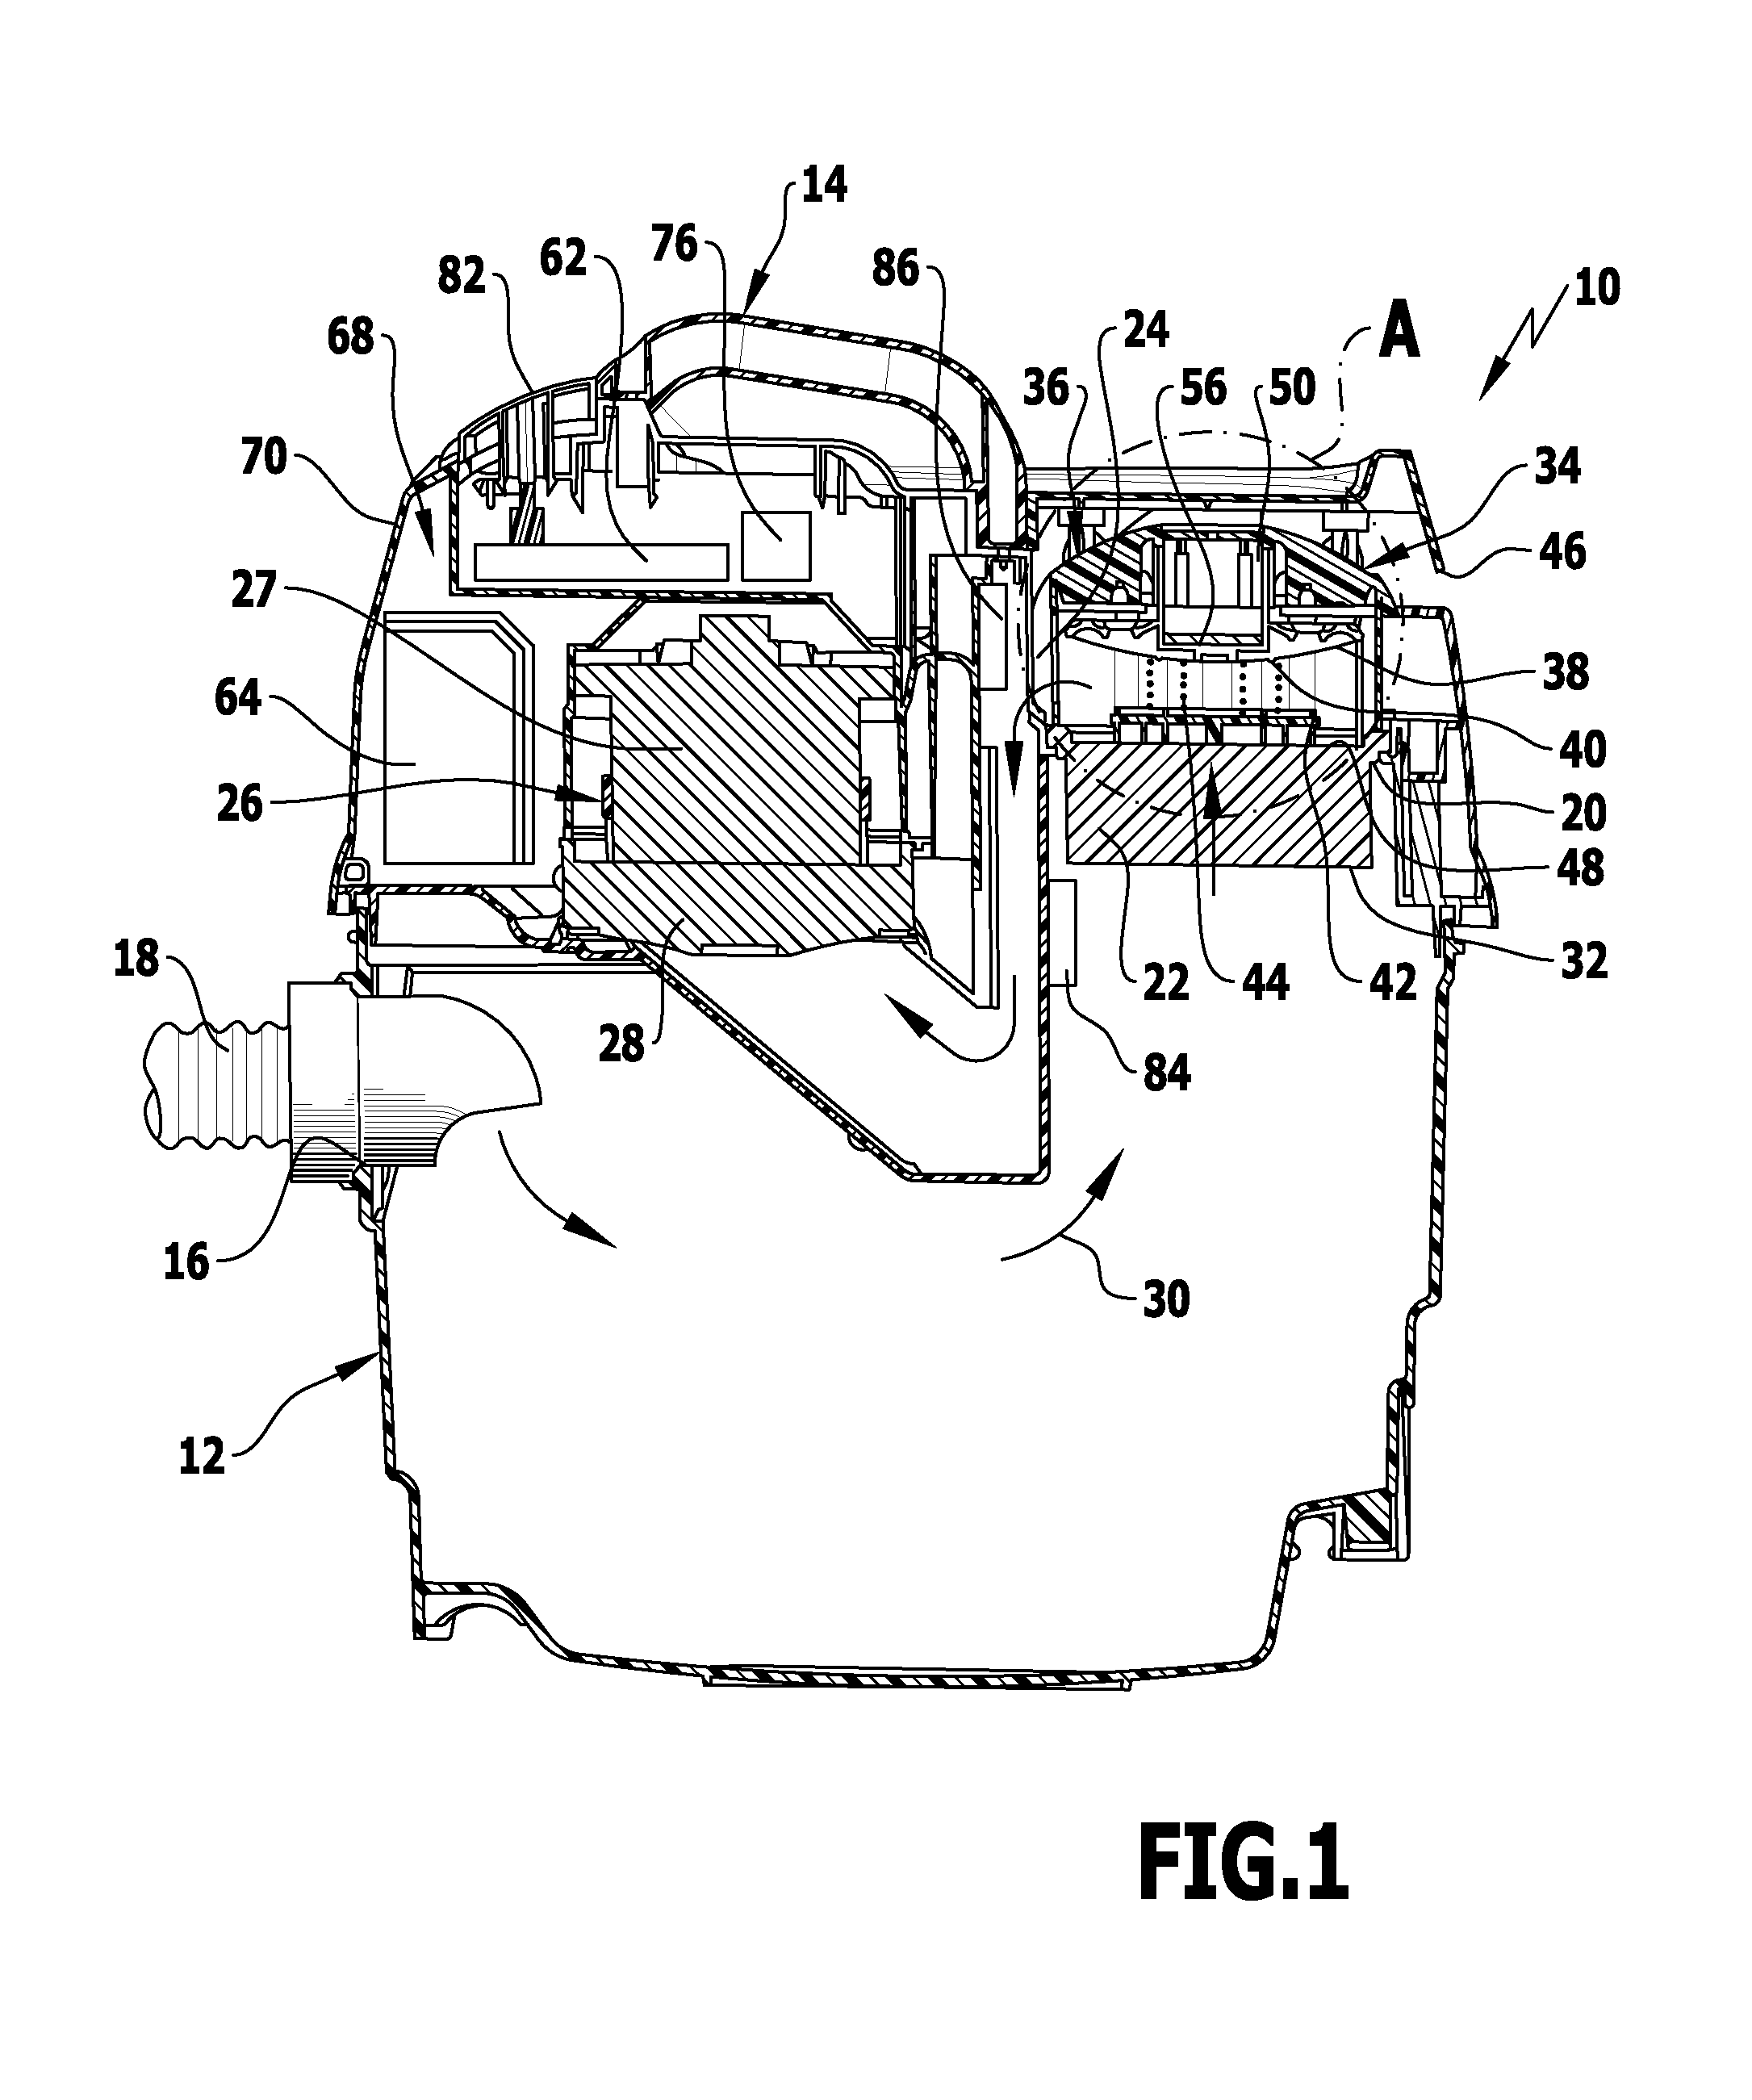 Method for cleaning a filter of a vacuum cleaner and vacuum cleaner for performing the method